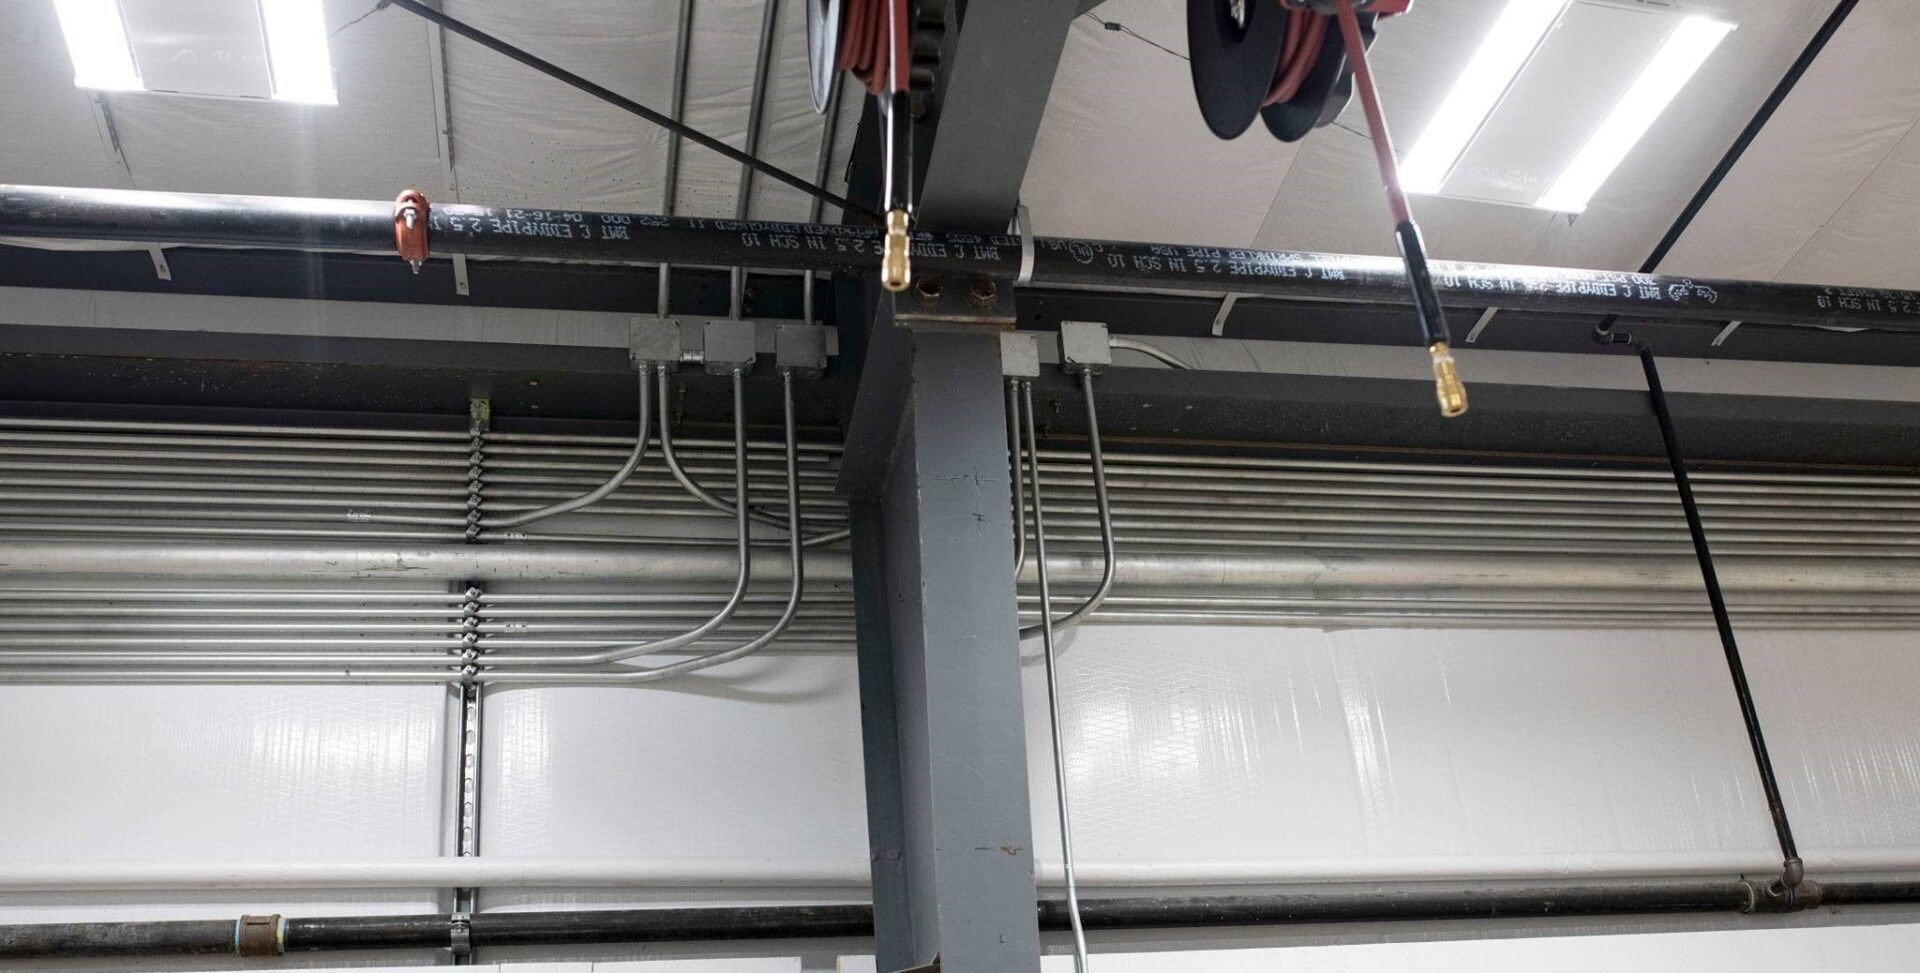 A large metal pole with wires hanging from it.